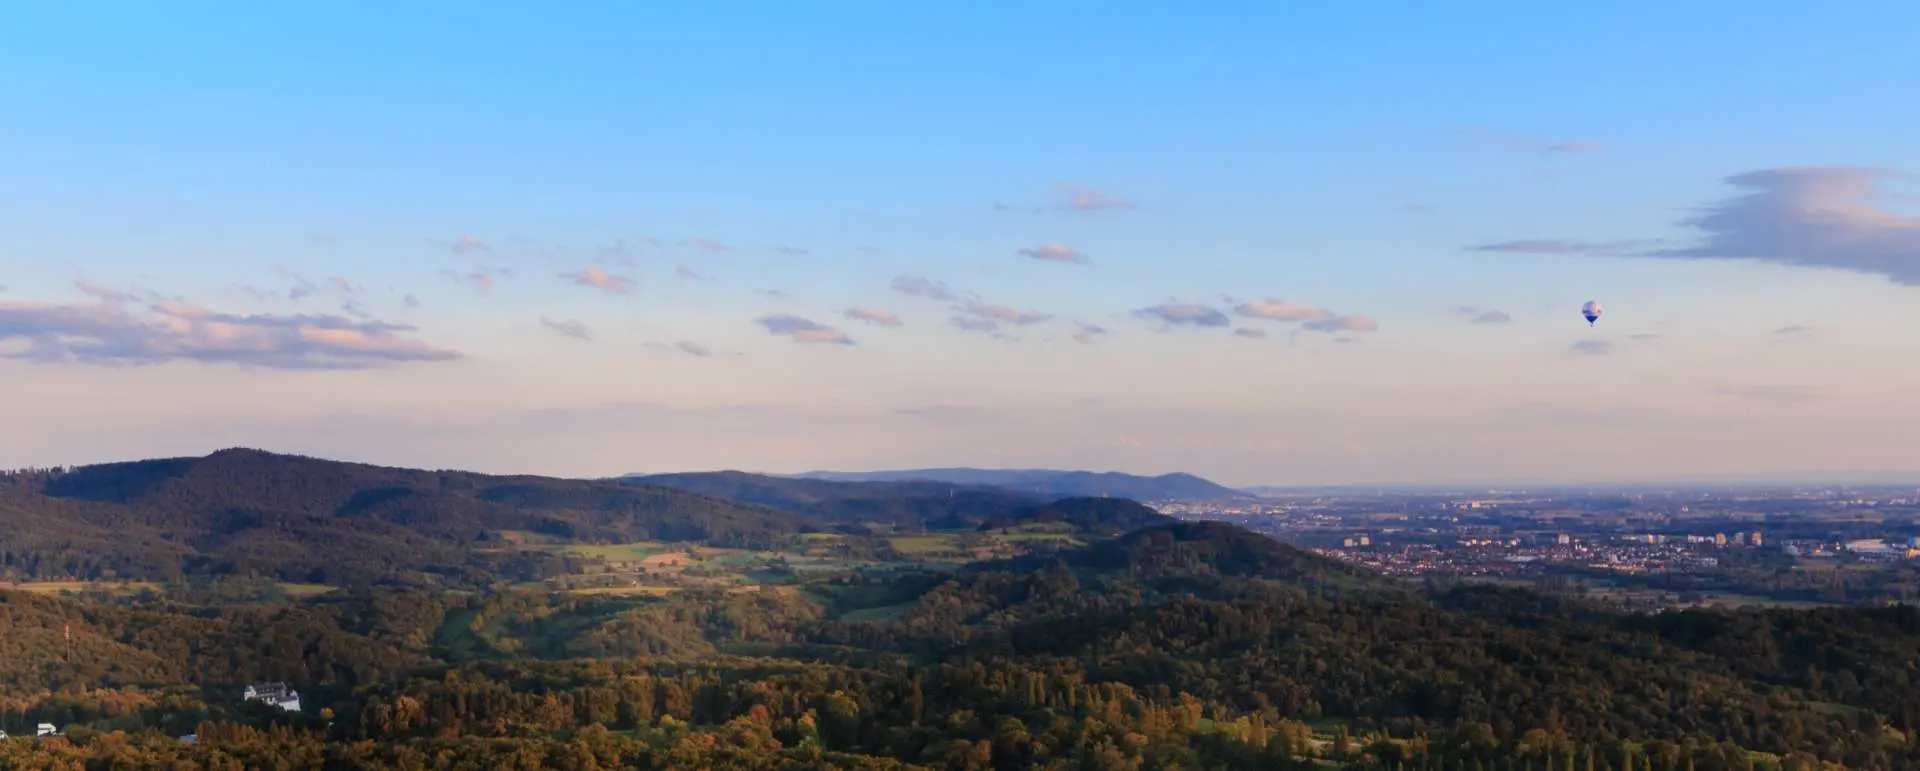 Constituency of Odenwald - the destination for graduates